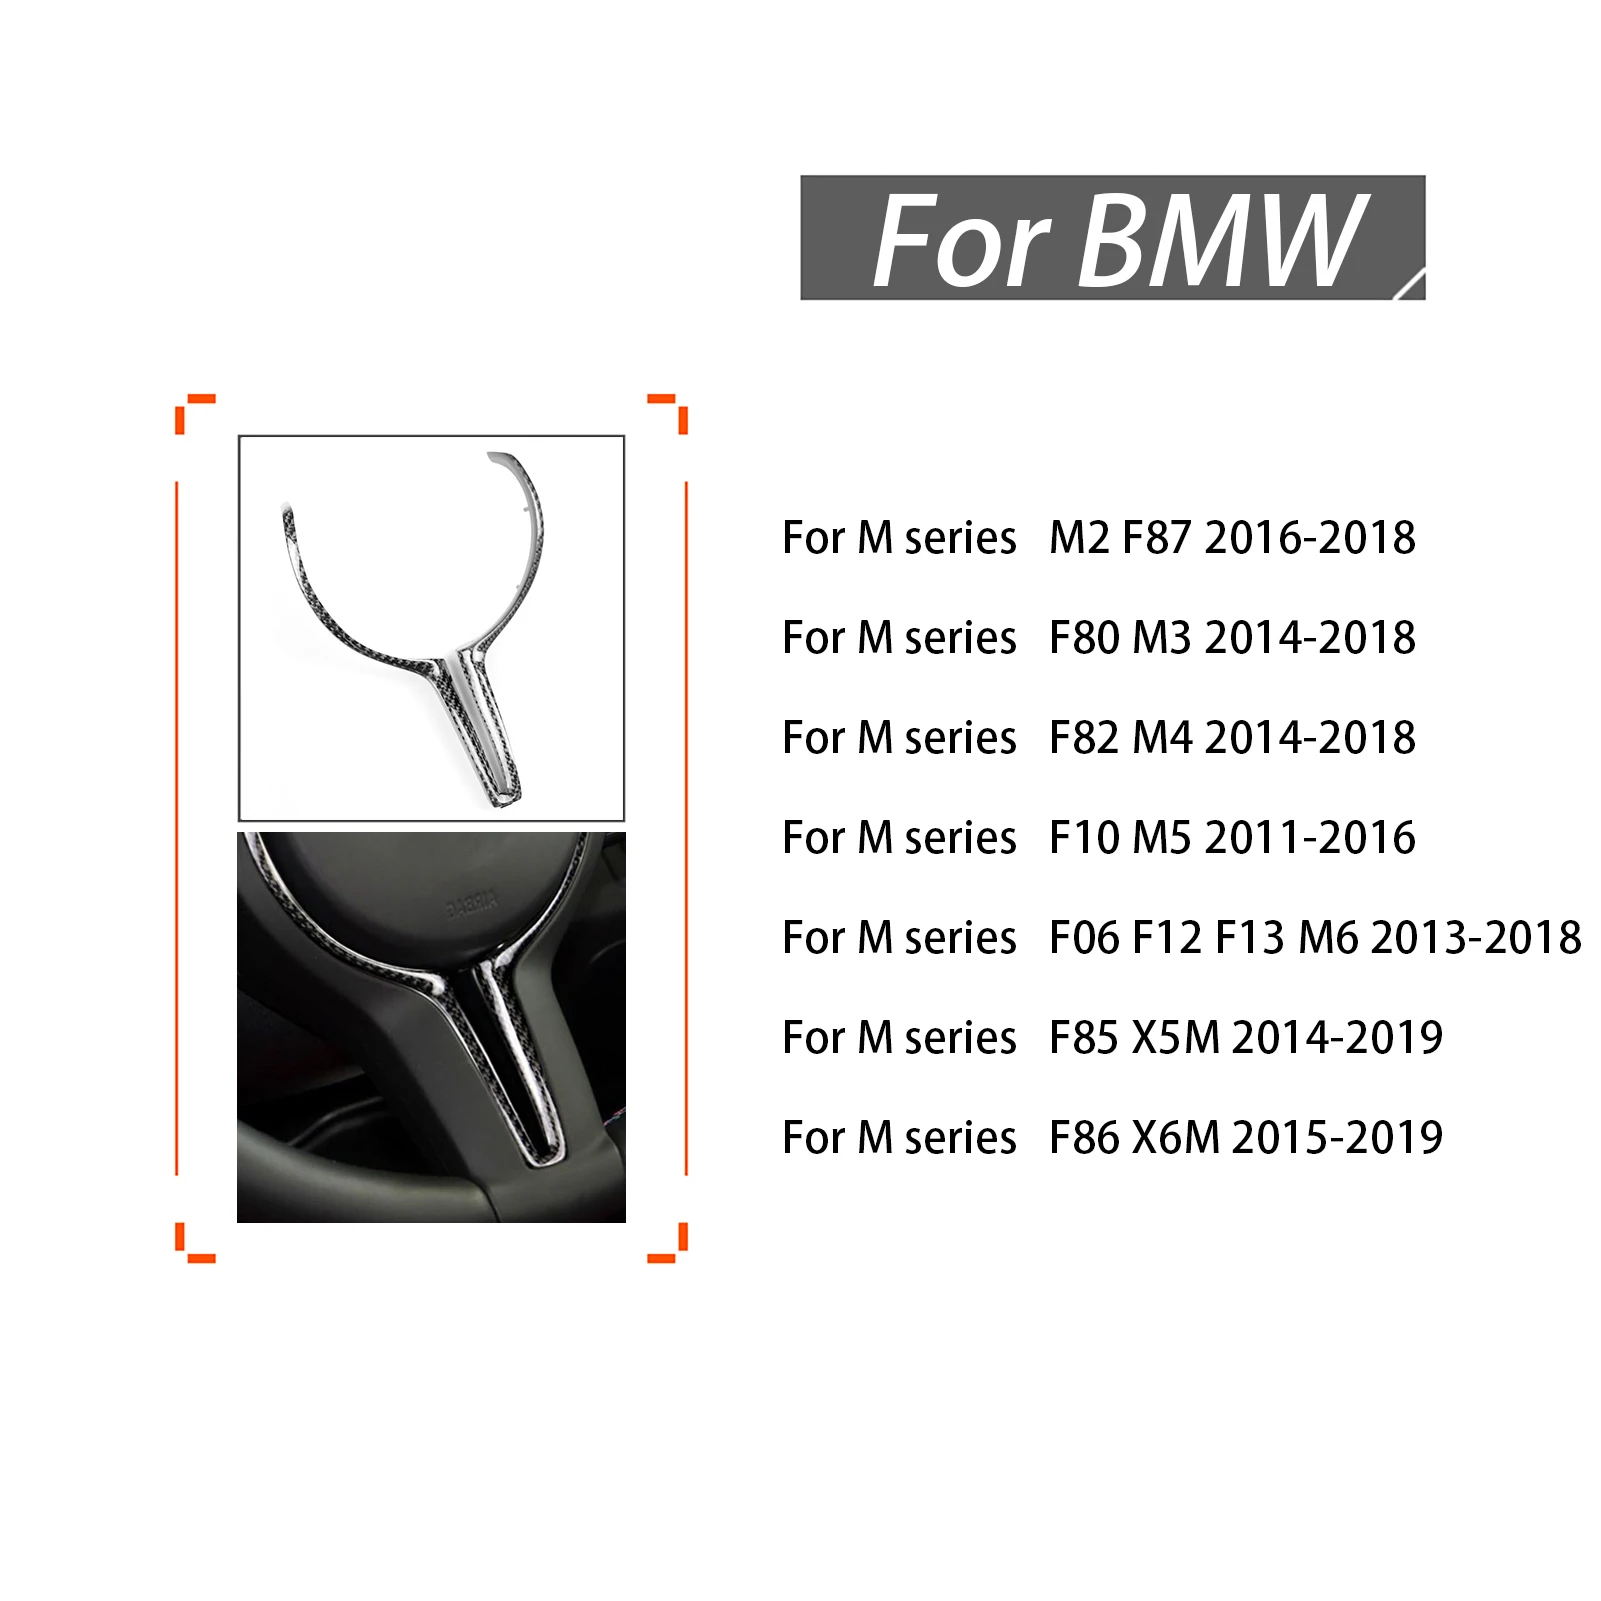 For BMW M Series F10 M5 Carbon Fiber Steering Wheel T-Shaped Replacement Lining Black Trim Car Interior Modification Accessory